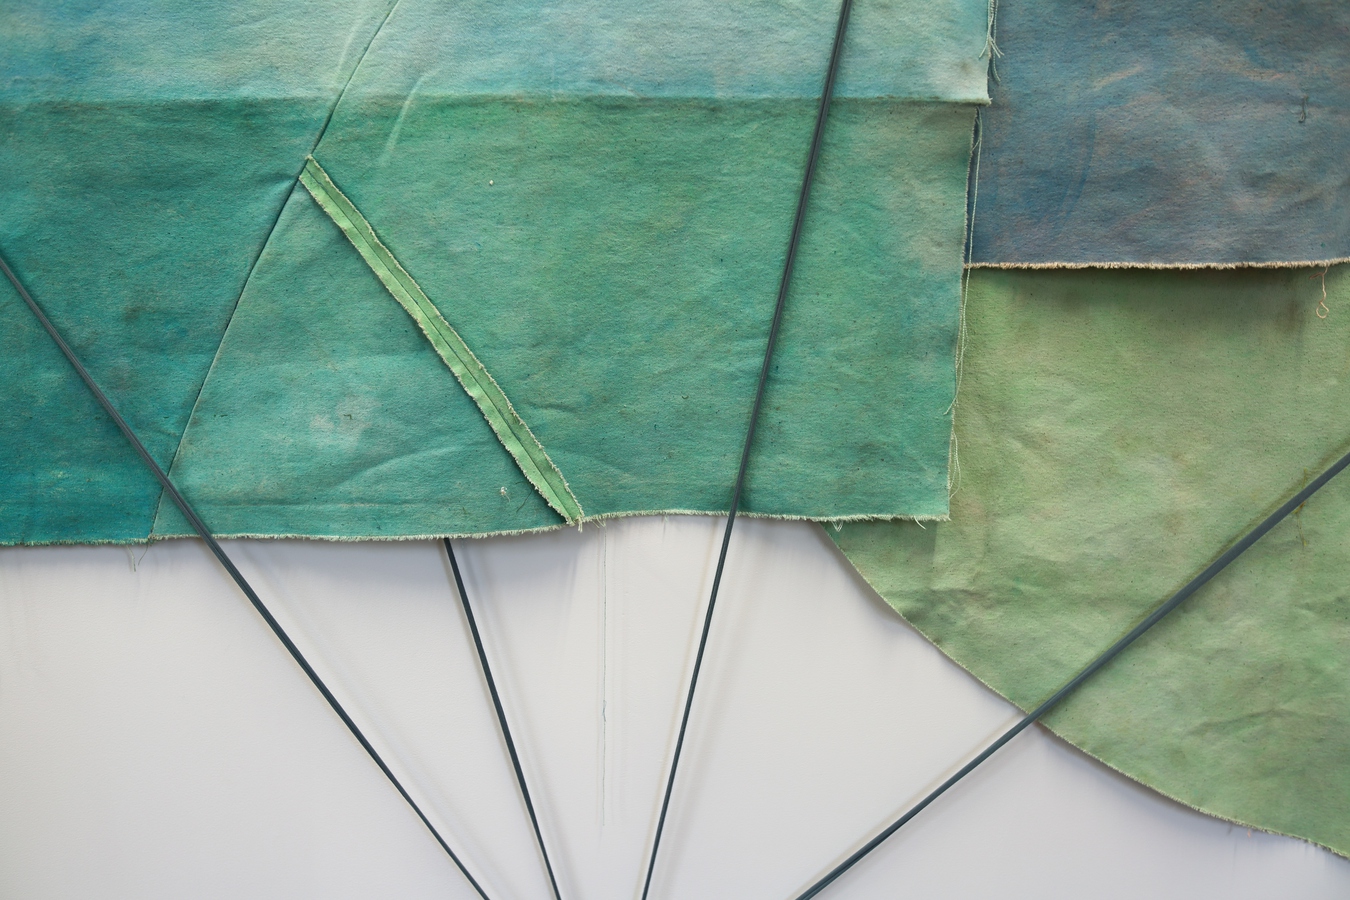 Image: Emma Fitts, From heat to translucence / your mineral touch (installation view), 2023. Weathered canvas, felted wool, aluminium and wooden rods, fabric ties. Photo by Amy Weng.